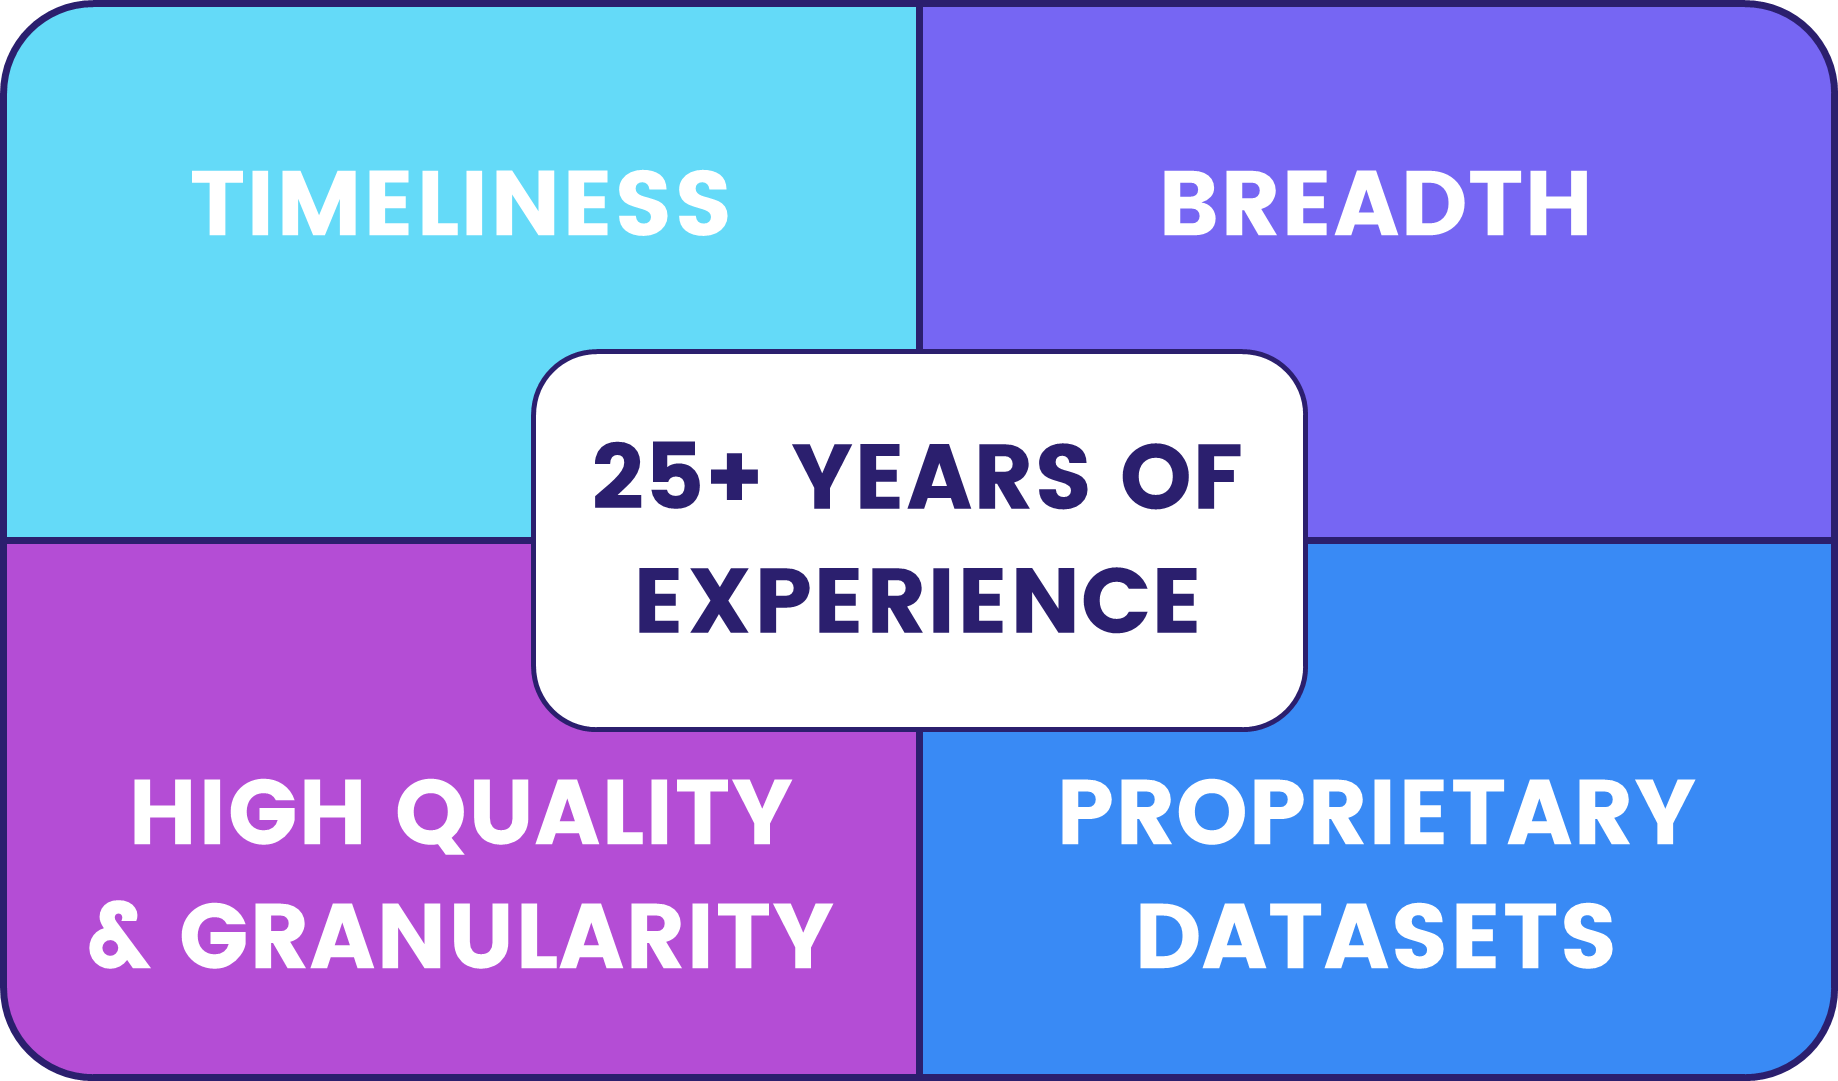 Image of a chart with 5 key reasons to trust EPFR data: timeliness, breadth, high quality and granularity, proprietary datasets, and 25+ years of experience.